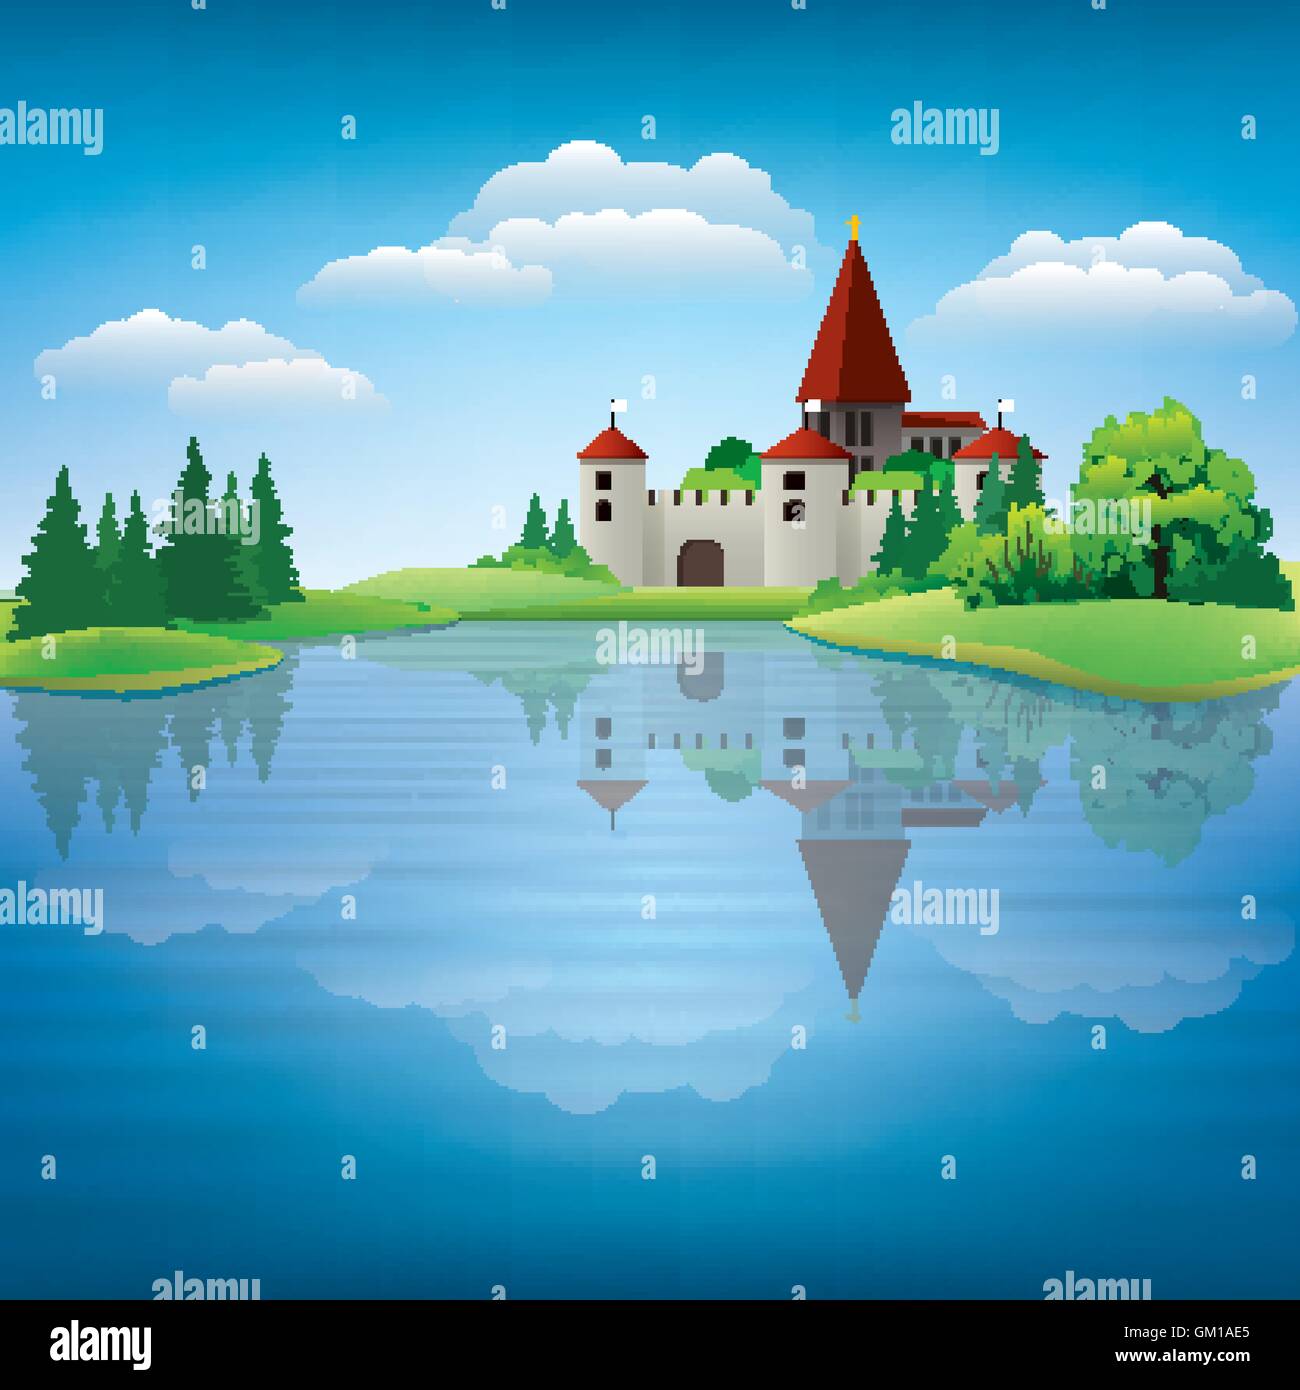 Cartoon drawing castle and a pond vector Illustration Stock Vector